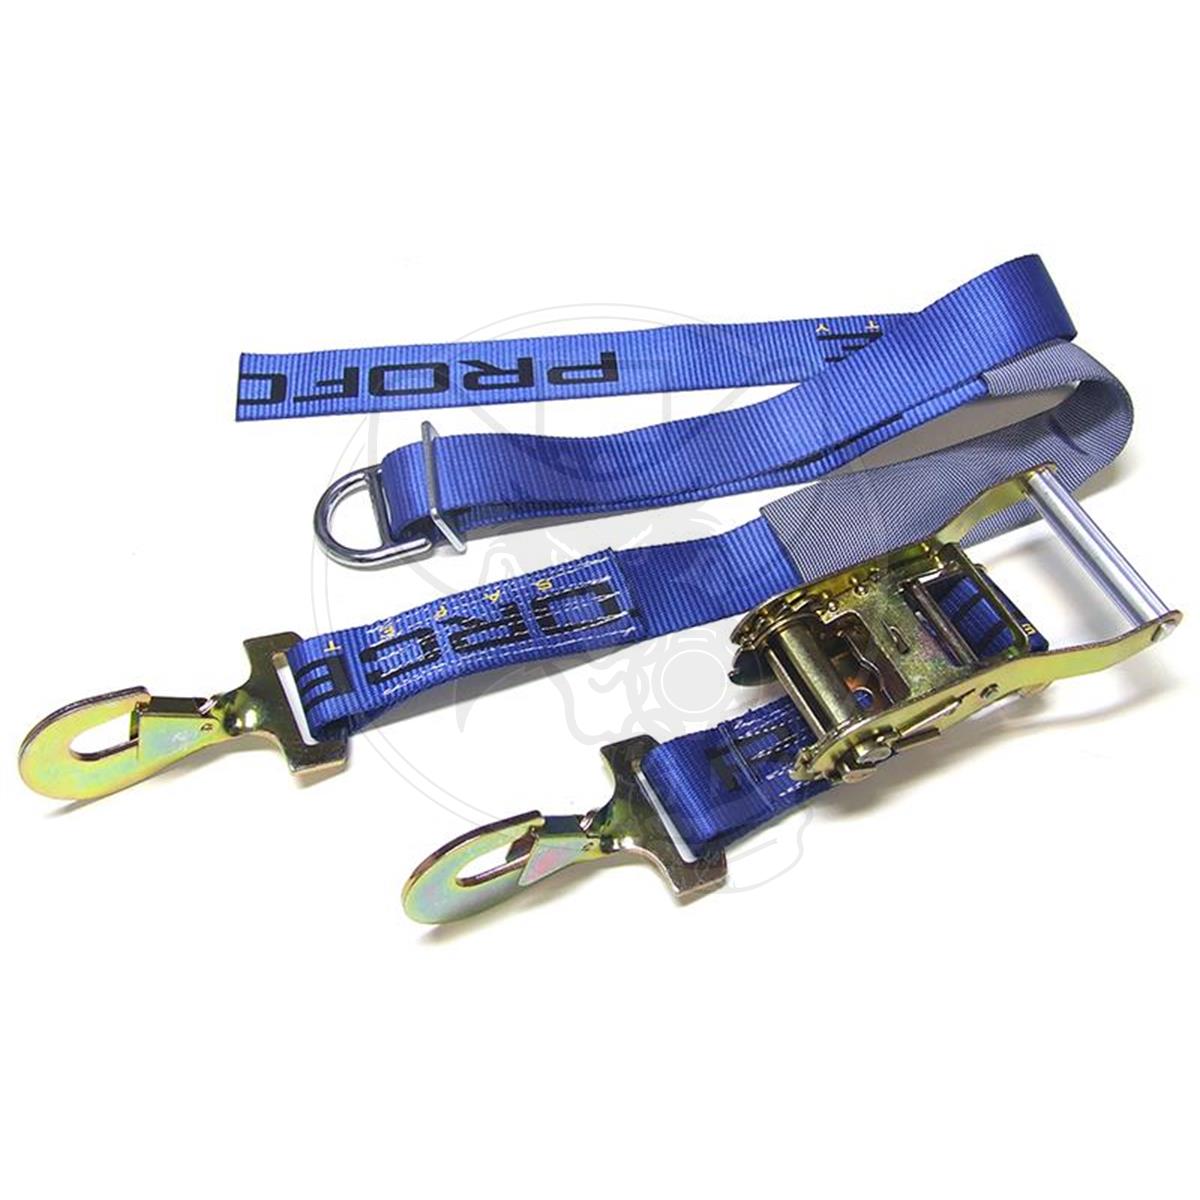 2 x 10' Ratchet Strap with Twisted Snap Hooks, Direct Hook - Blue